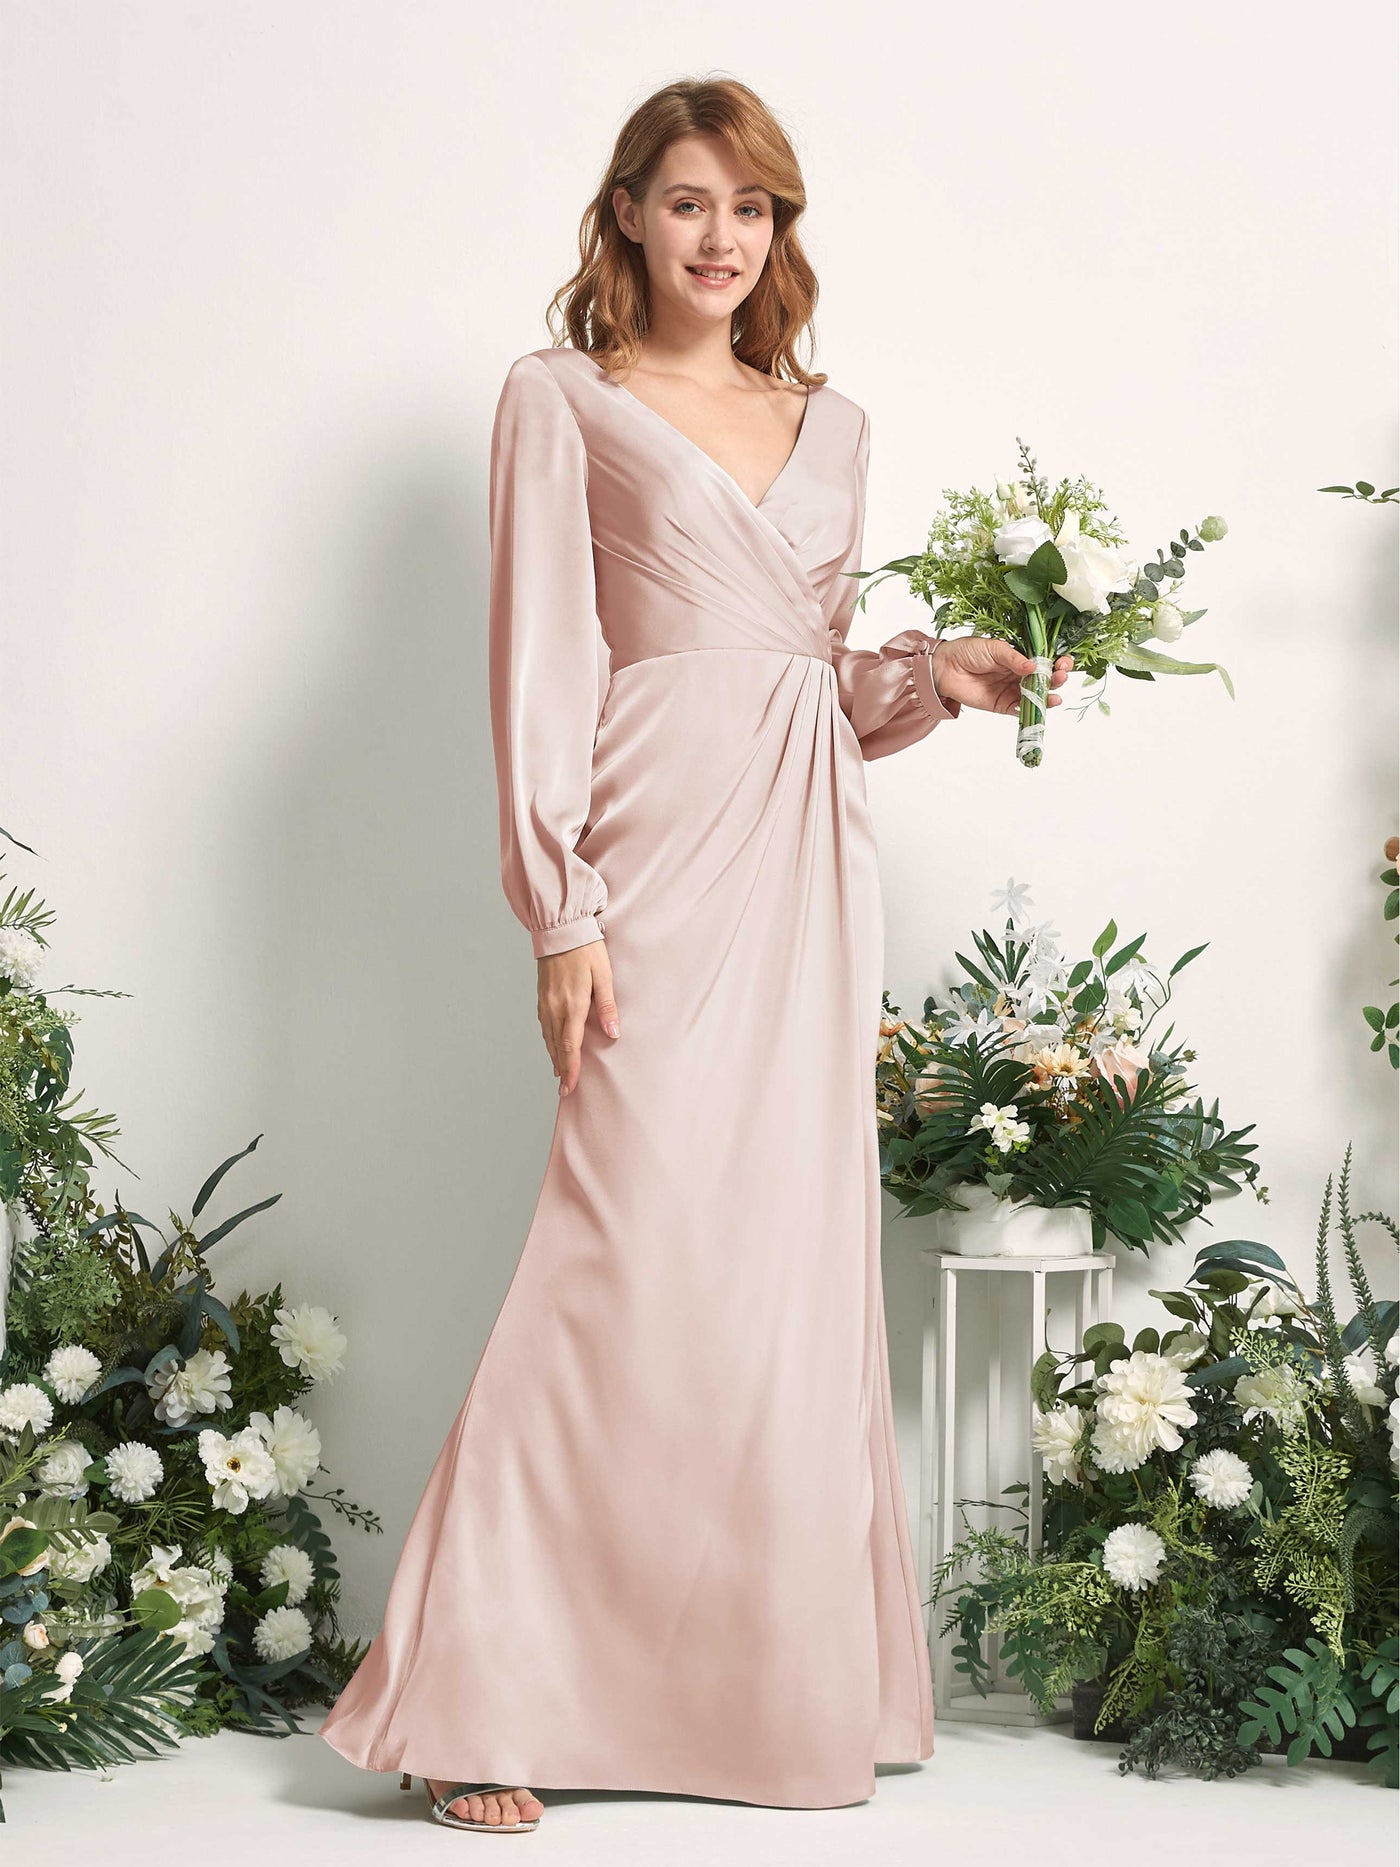 Pearl Pink Bridesmaid Dresses Bridesmaid Dress Ball Gown Satin V-neck Full Length Long Sleeves Wedding Party Dress (80225110)#color_pearl-pink